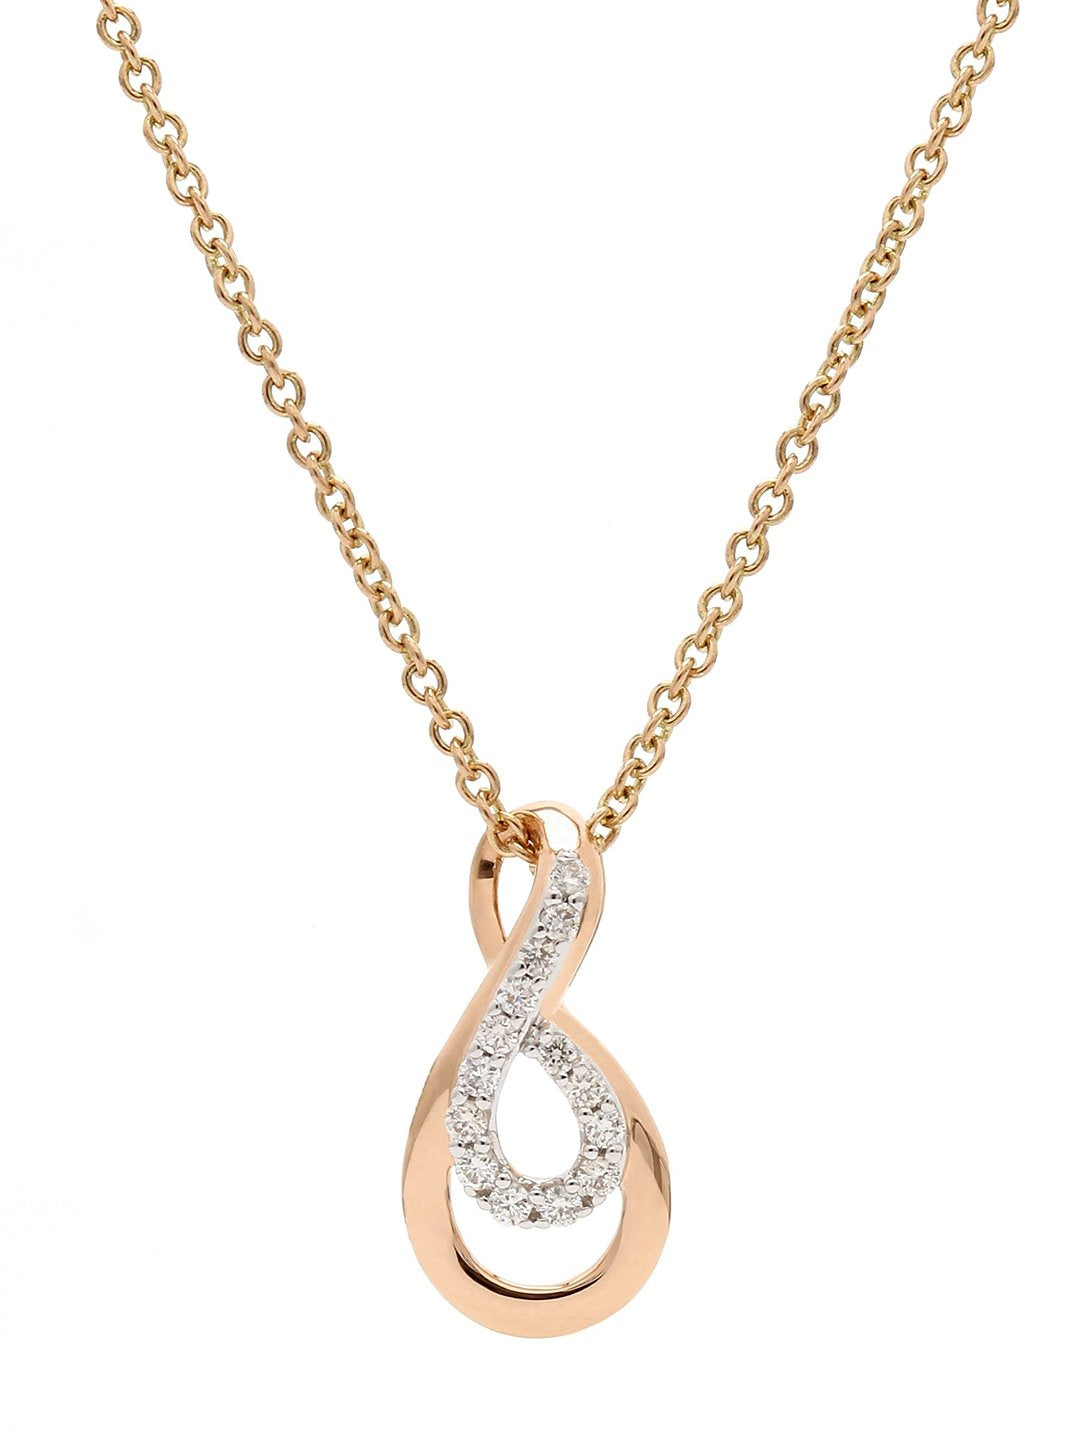 Real Diamond Infinity Pendant With Chain - Zest Mélange 